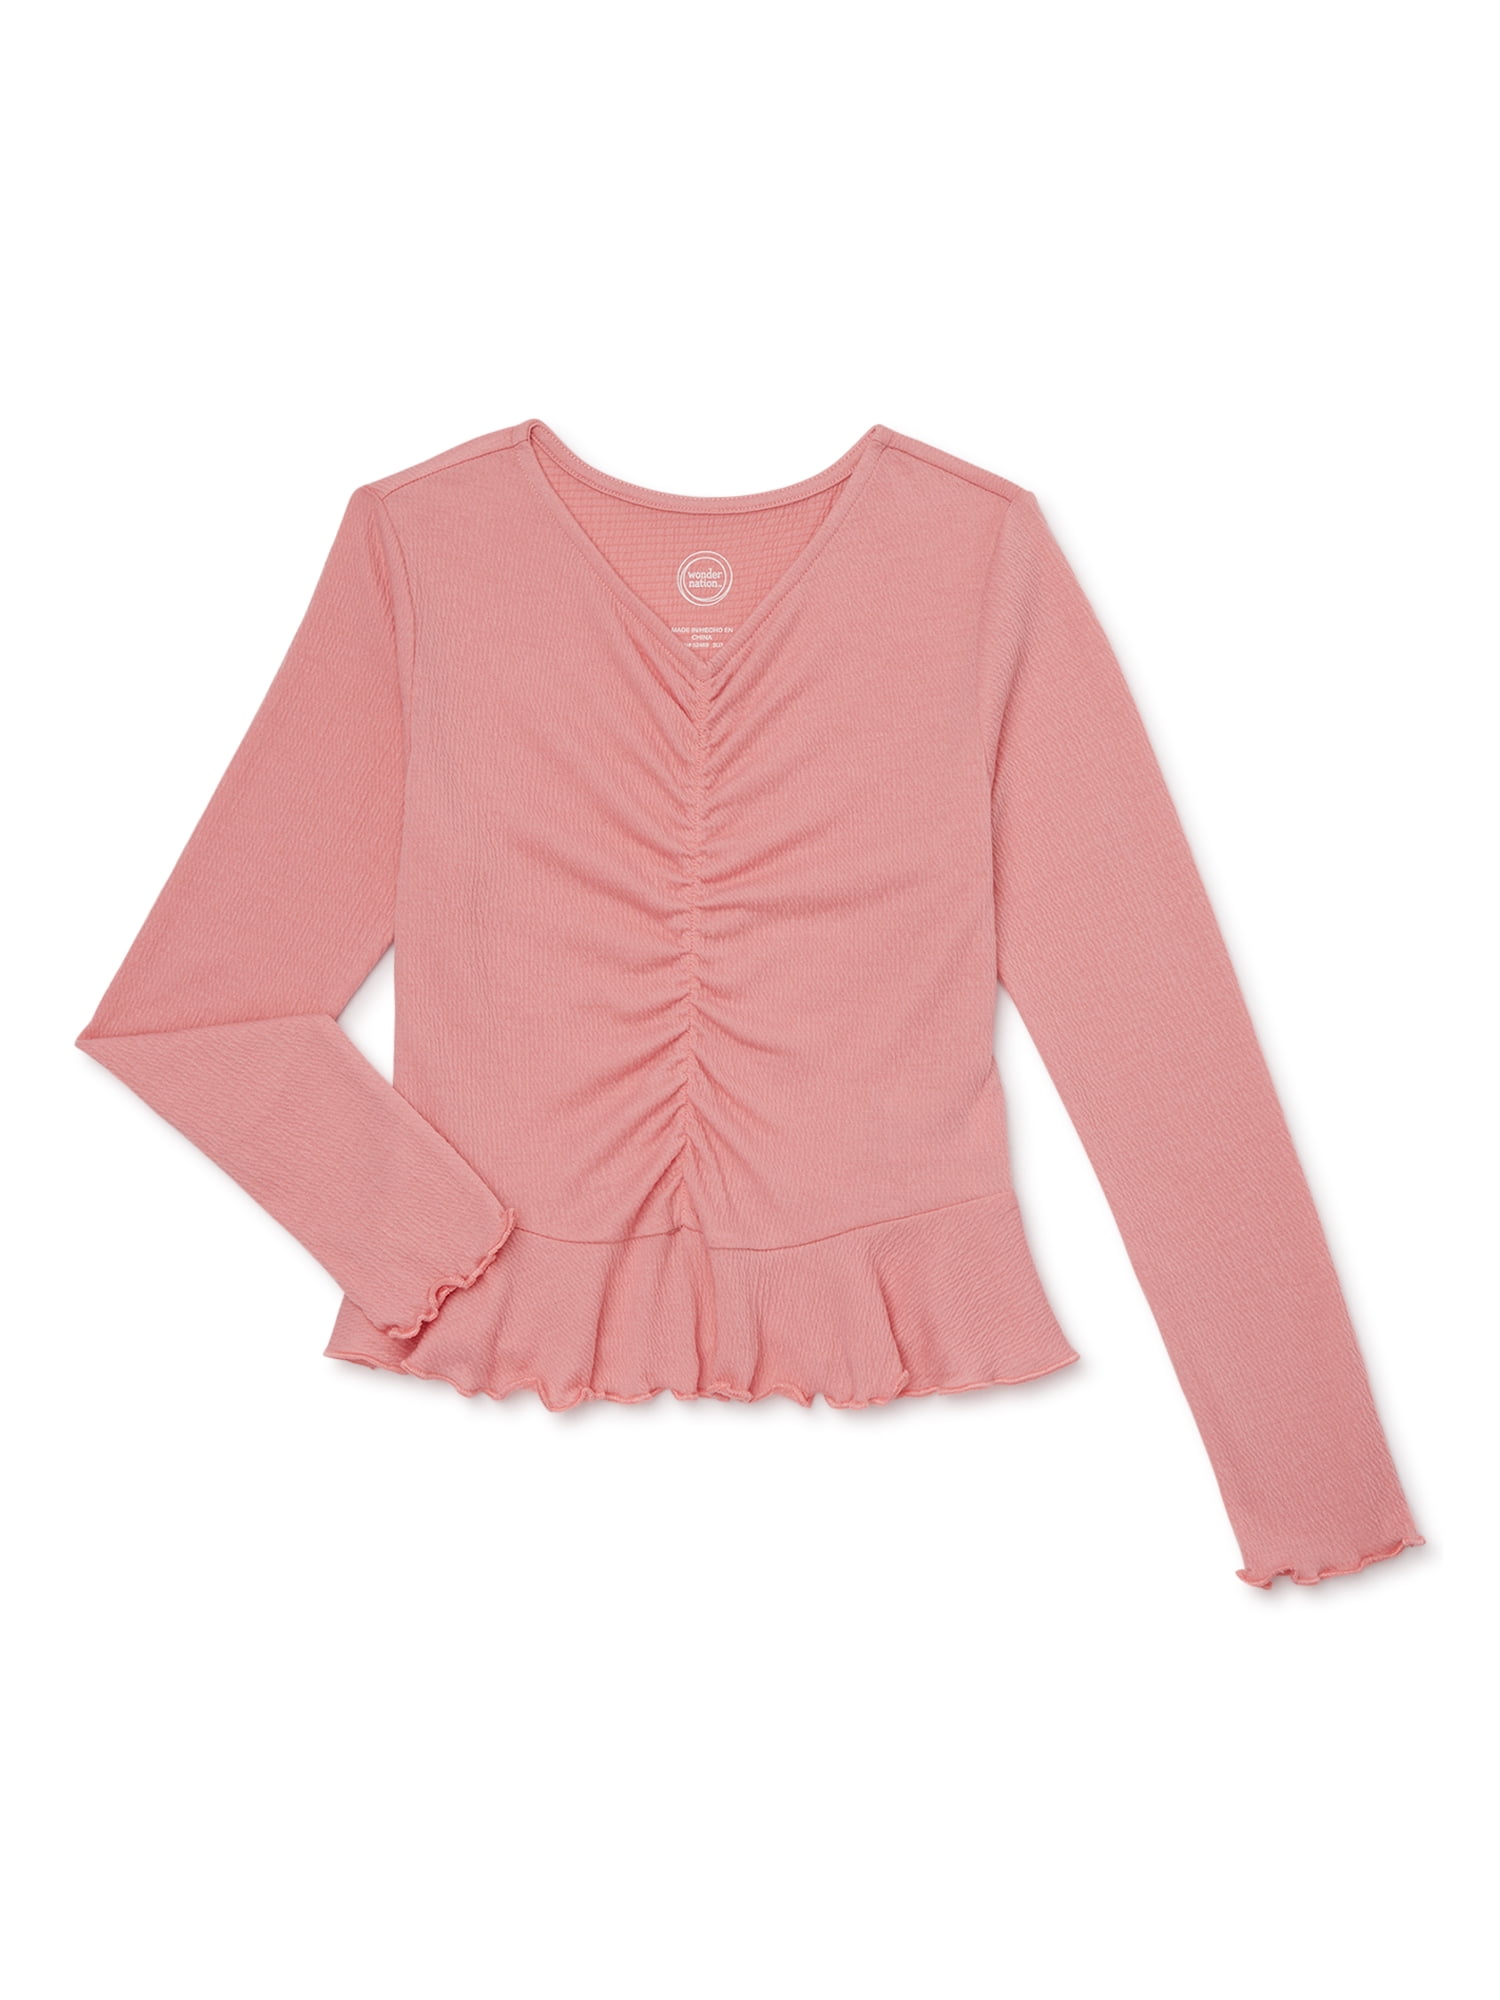 Wonder Nation Girls' Cinch Front Peplum Top with Long Sleeves, Sizes 4-18 &  Plus 